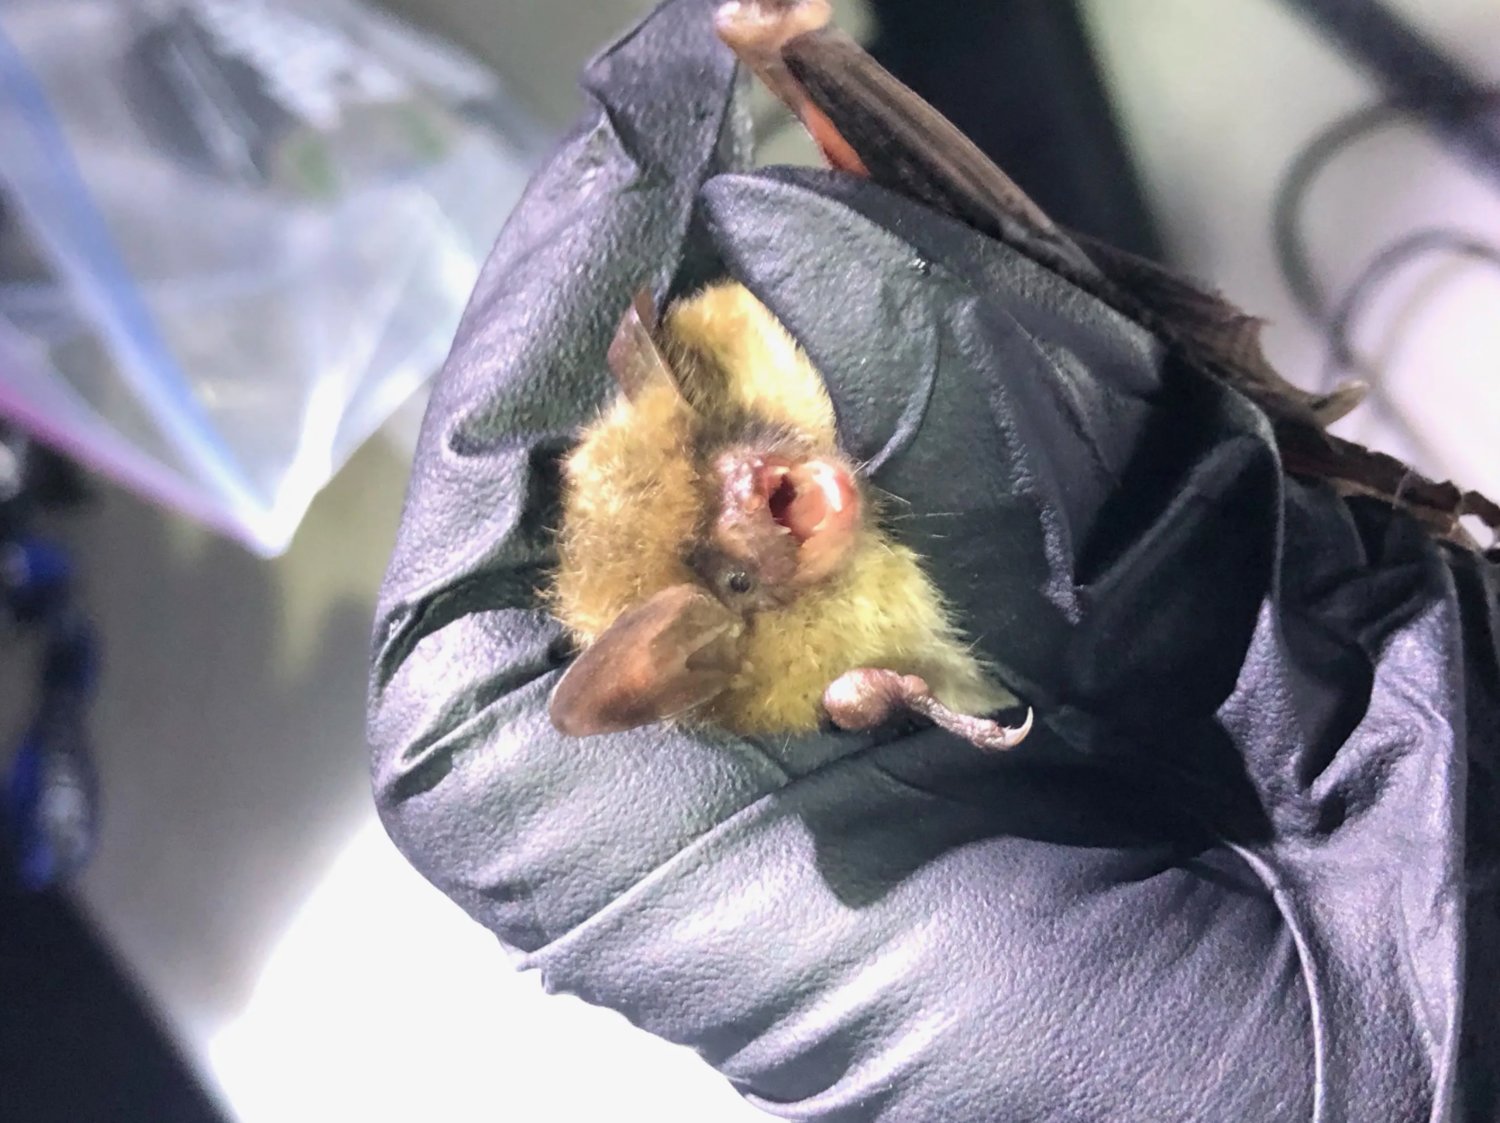 Ph.D. candidate Samantha Hoff will speak about the threatened northern long-eared bat at the Nantucket Conservation Foundation's annual meeting Aug. 5.